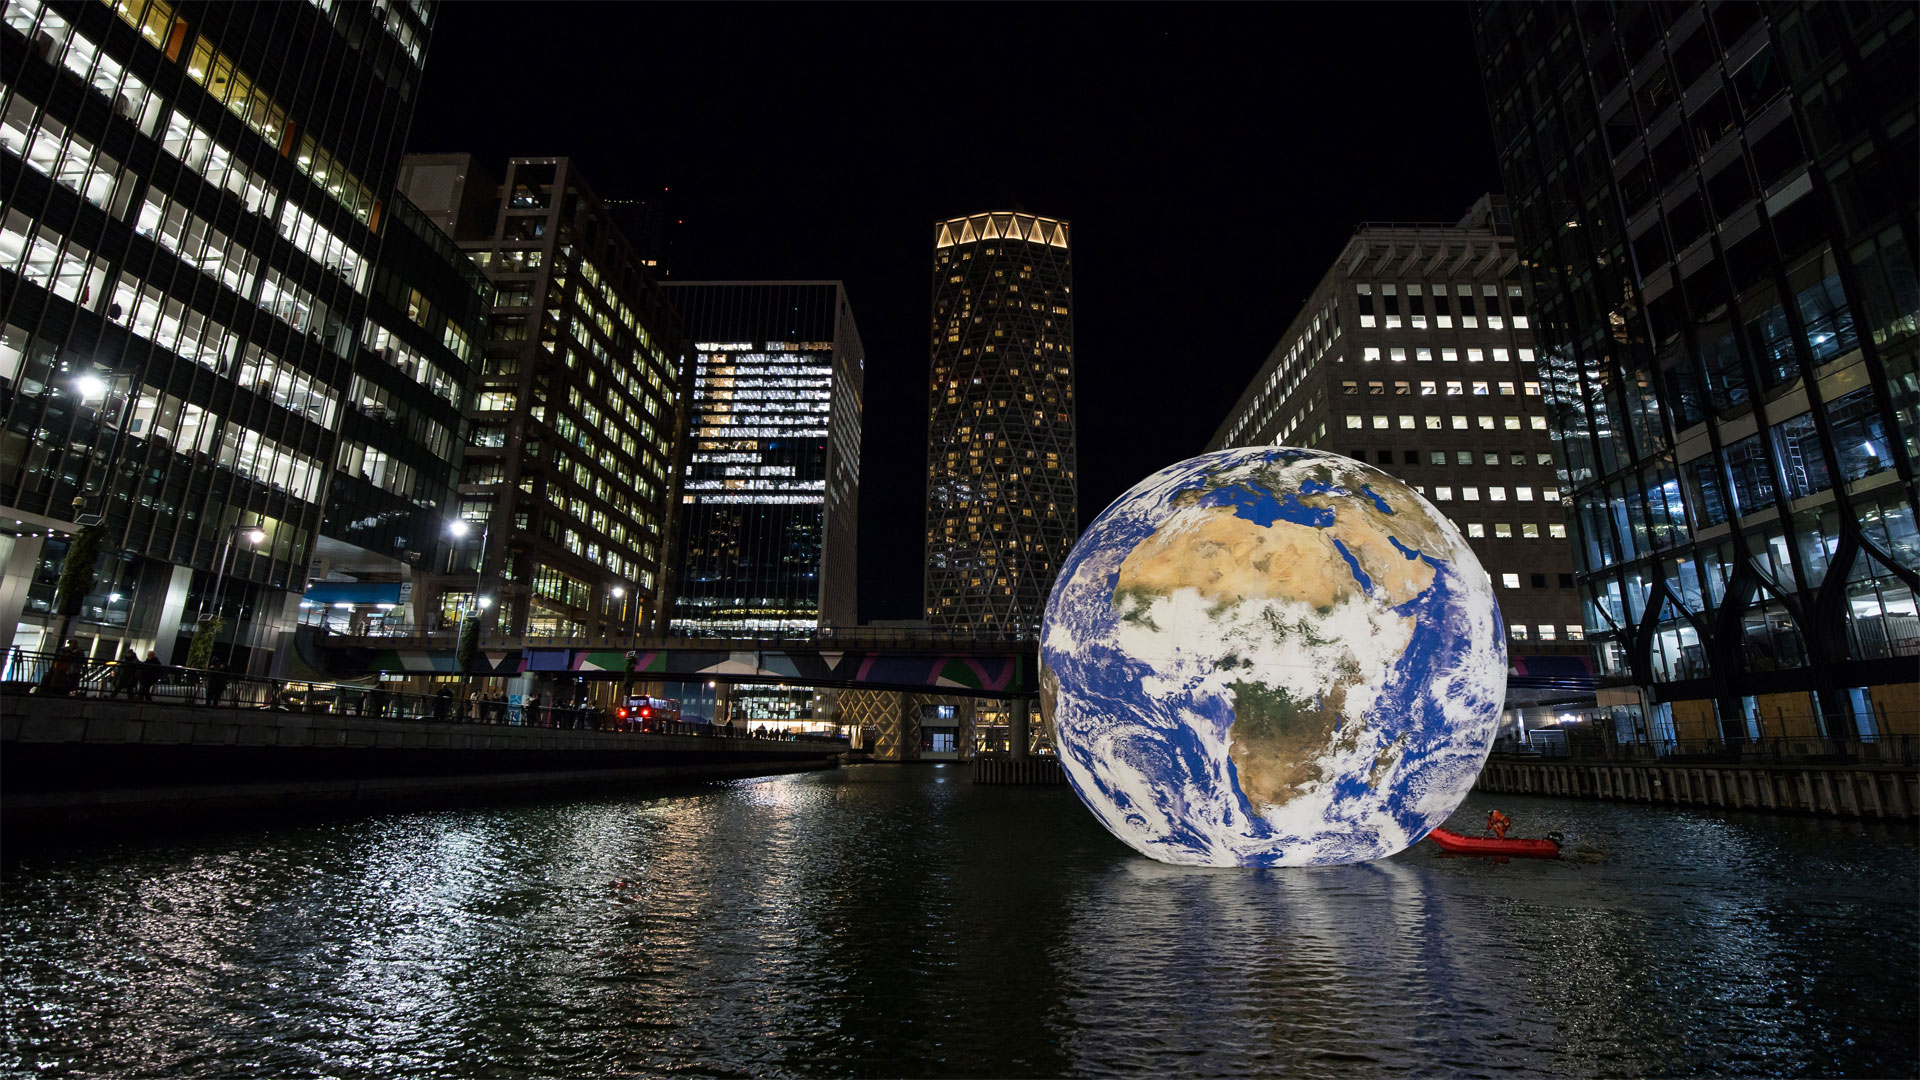 Gaia in Canary Wharf, Londres by Jason Hartley @pinkbeephotography